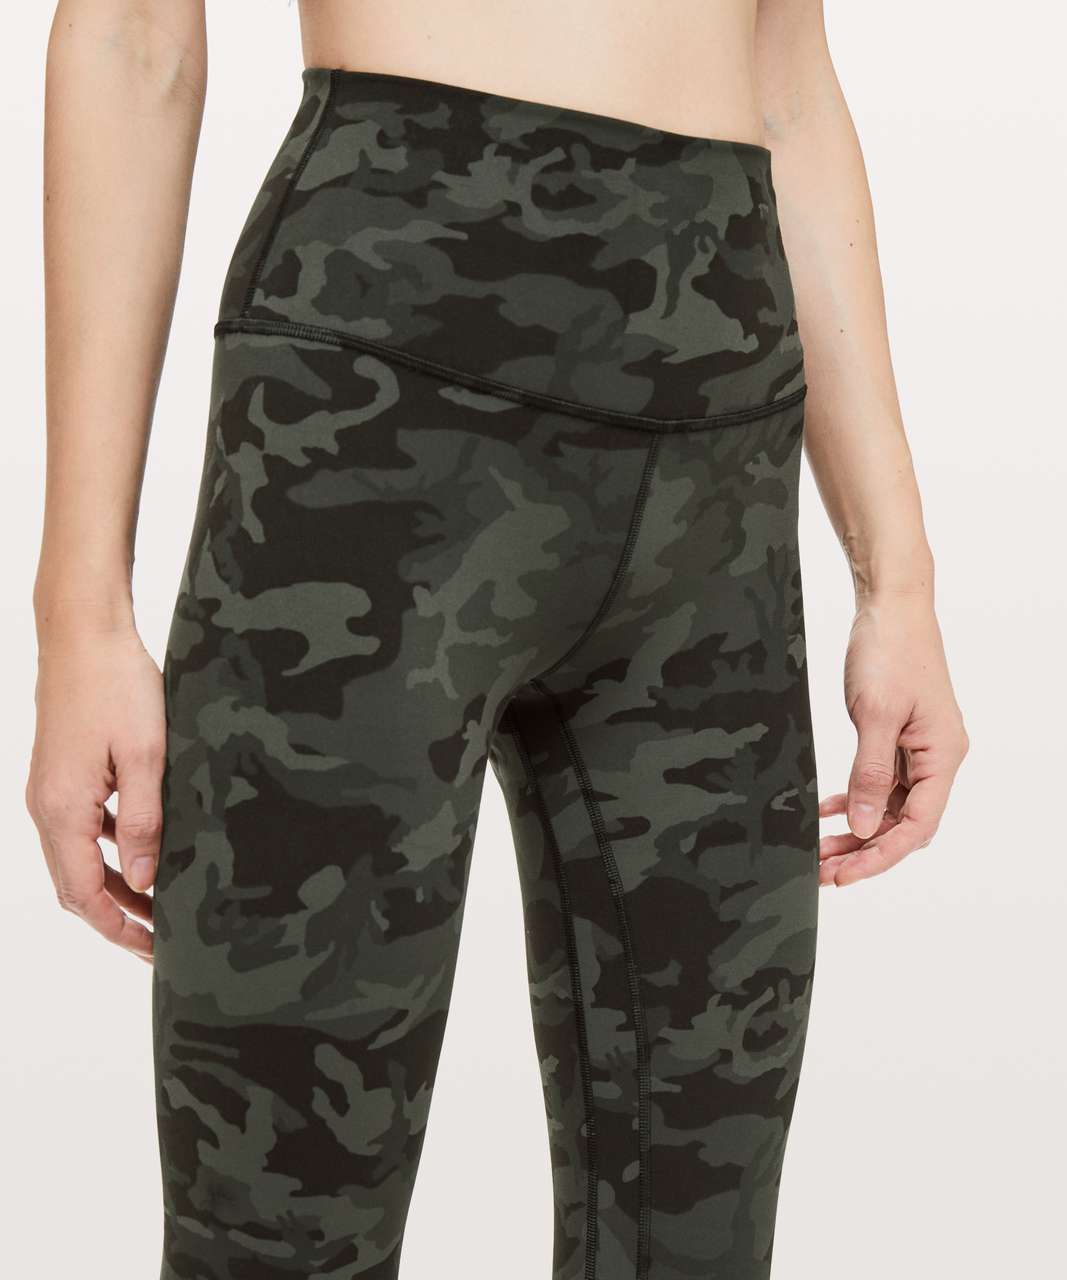 Lululemon Align Pant *Full Length 28" - Incognito Camo Multi Gator Green (First Release)